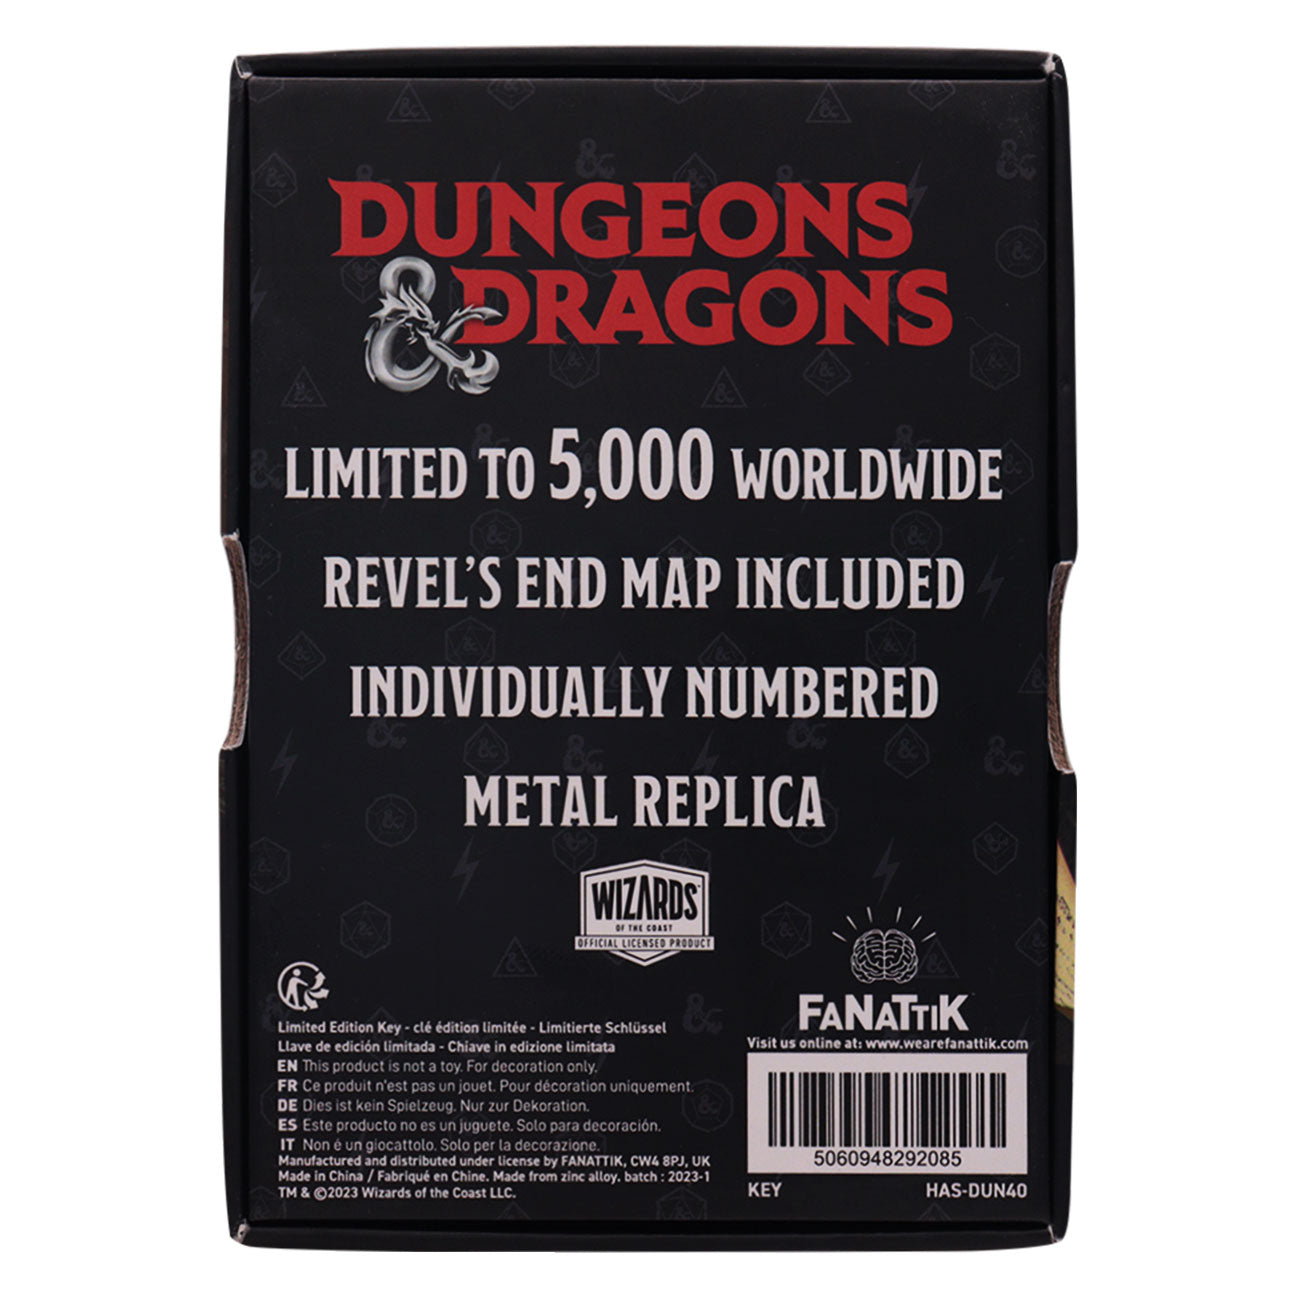 Dungeons & Dragons Limited Edition Replica Thieves Key to the Vault from Keys from the Golden Vault